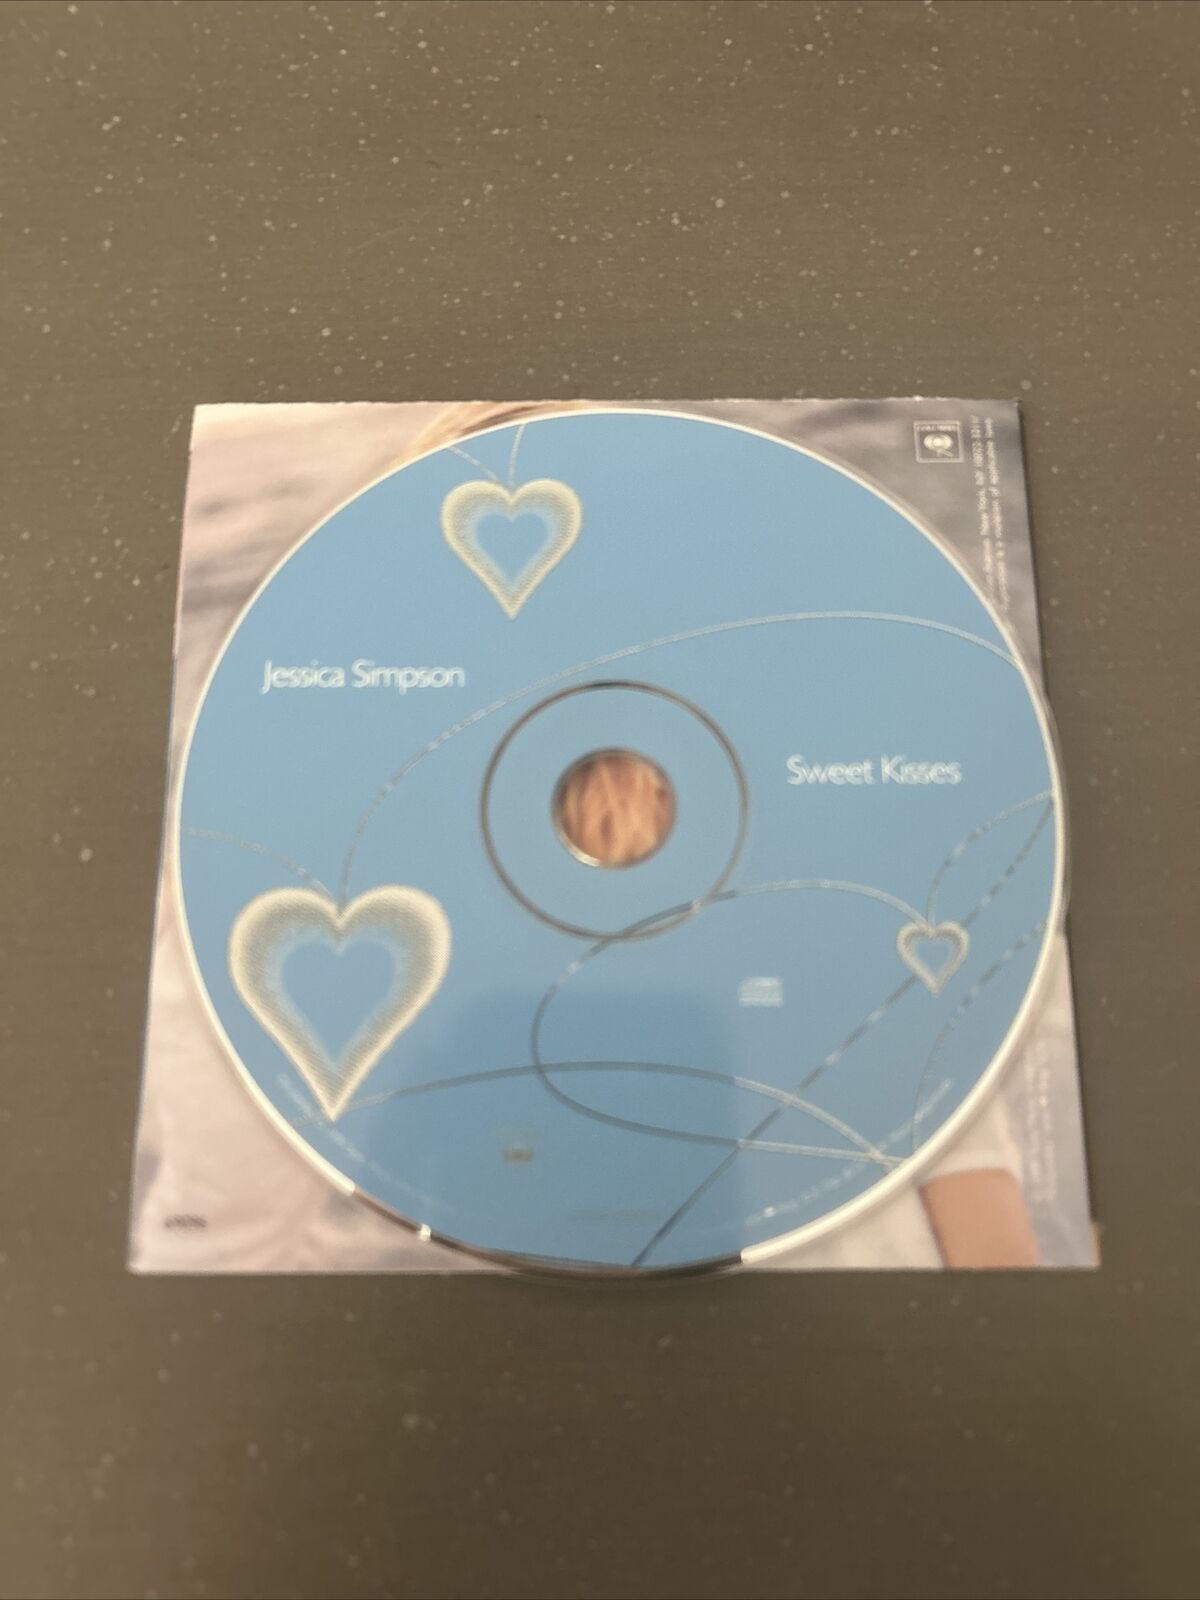 Jessica Simpson Sweet Kisses CD Excellent Disc Booklet Only No Case Free Ship